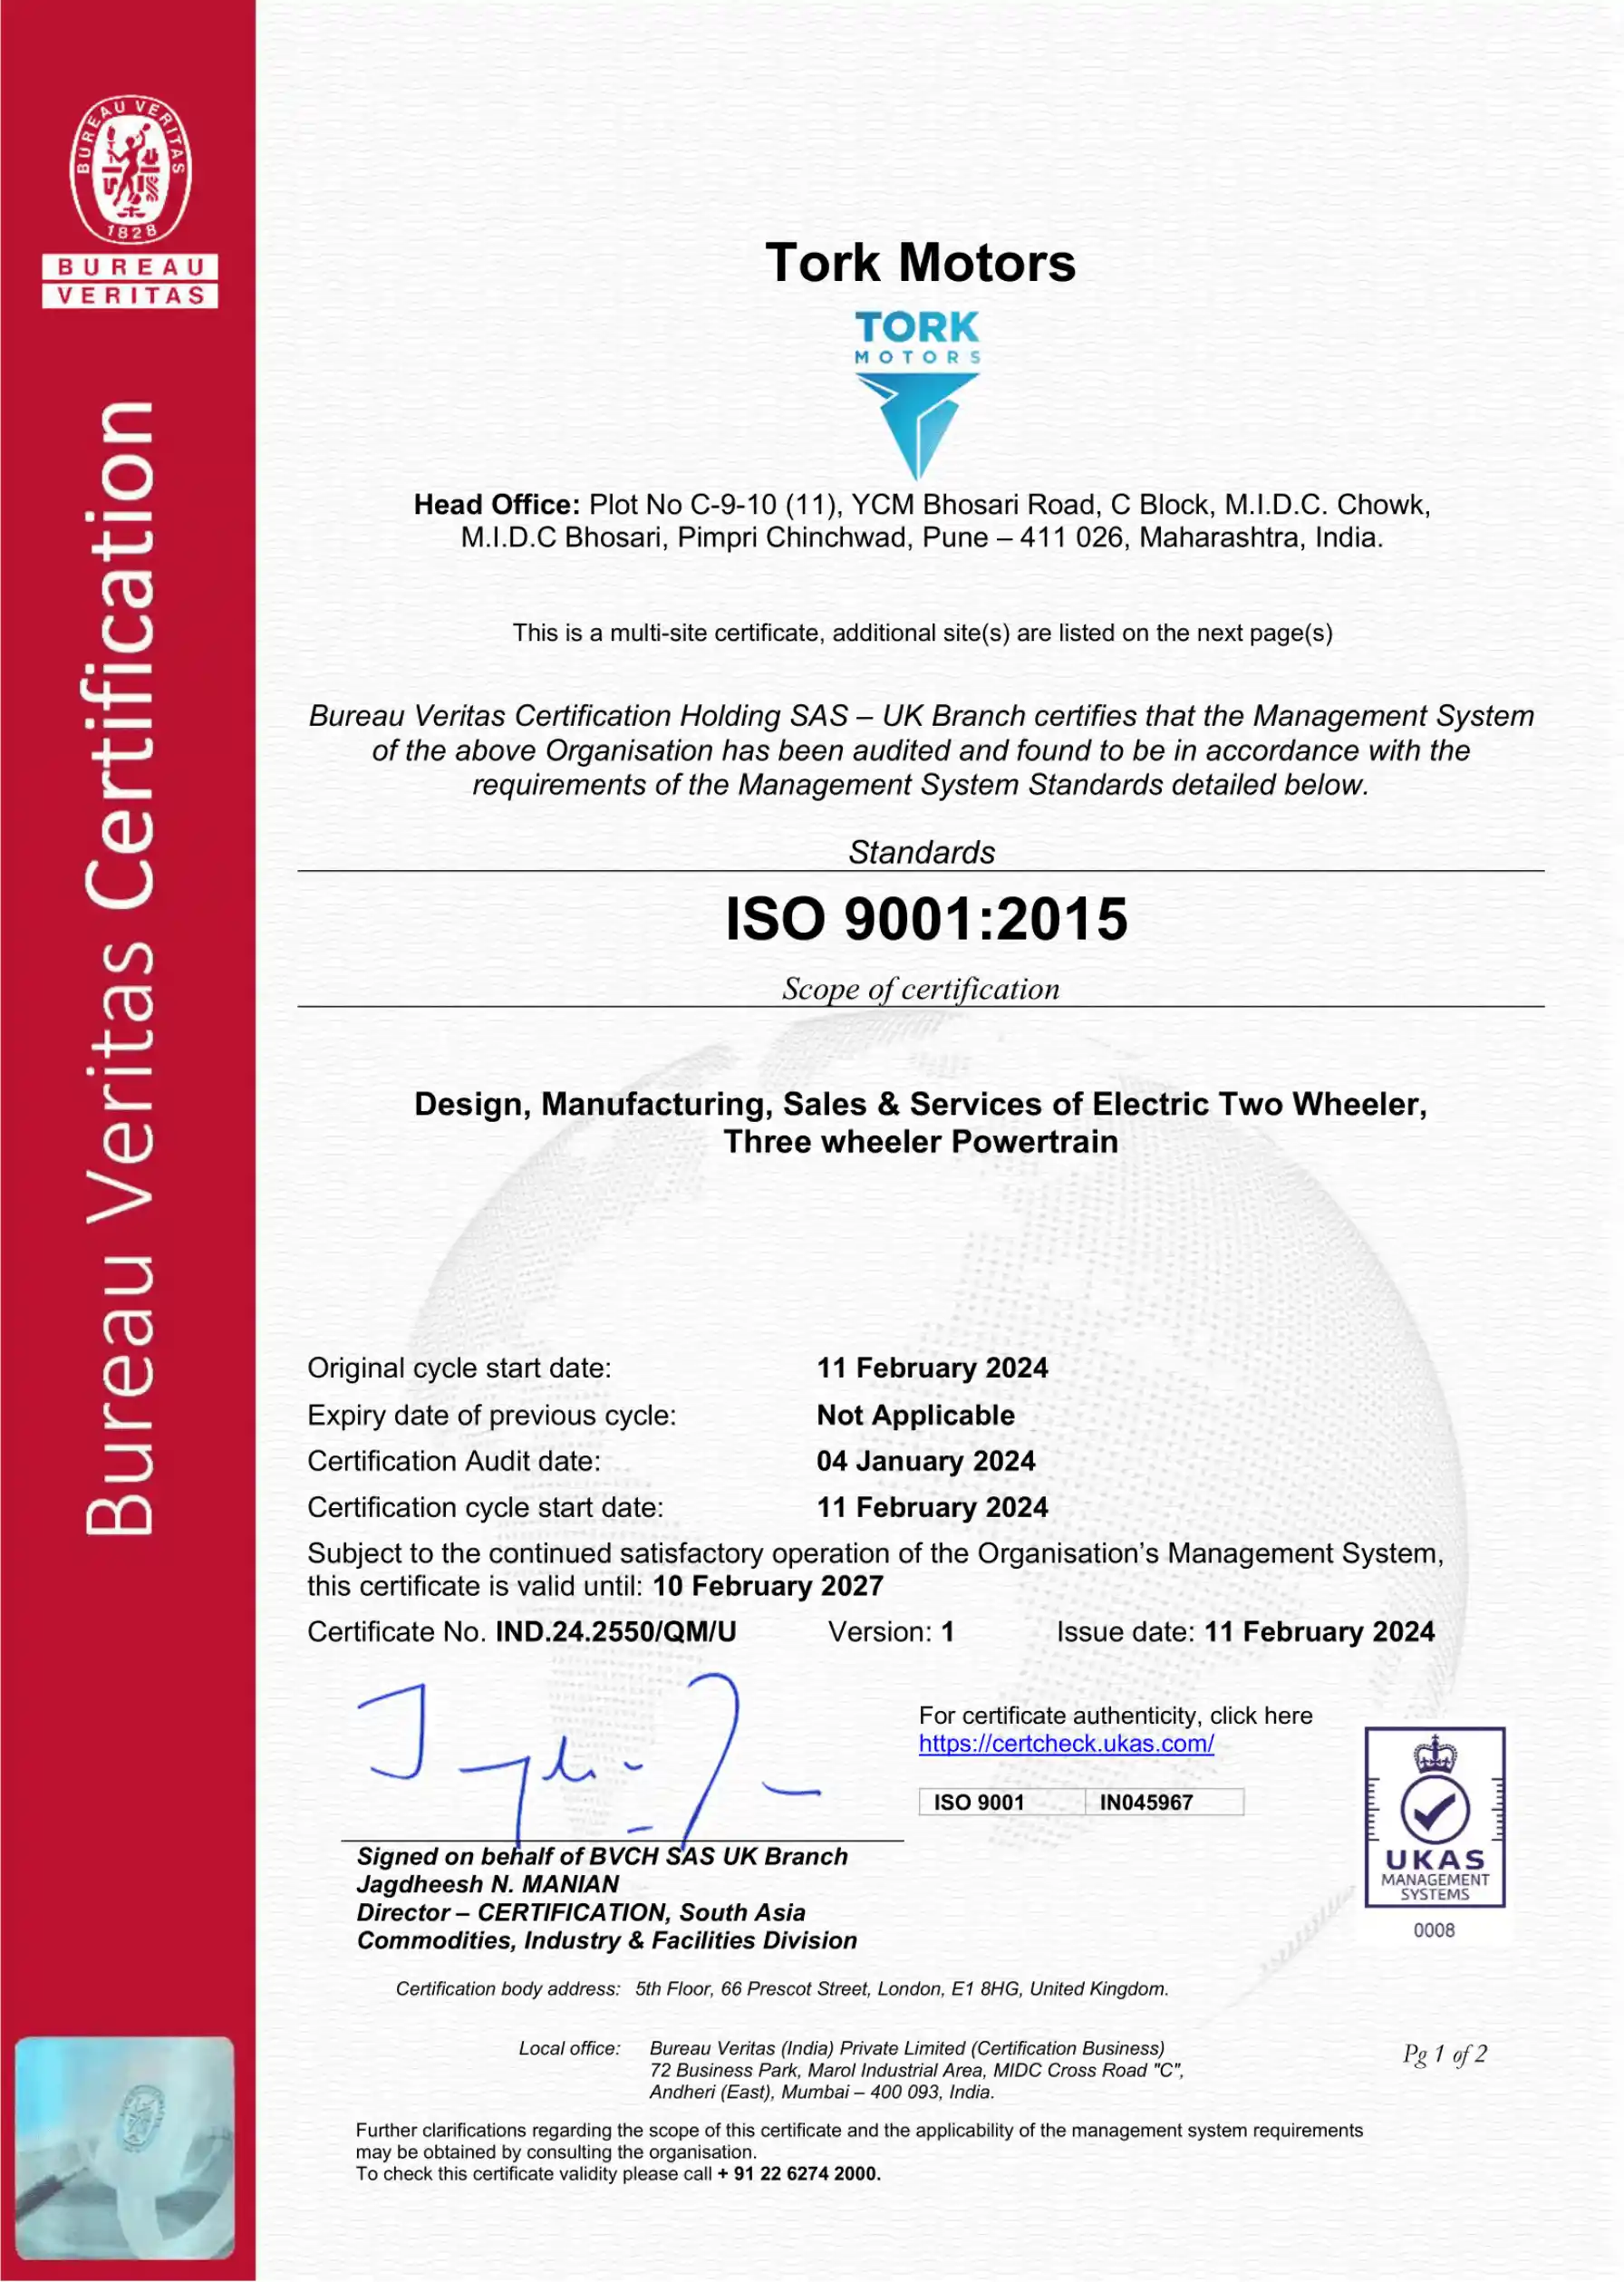 iso-certificate